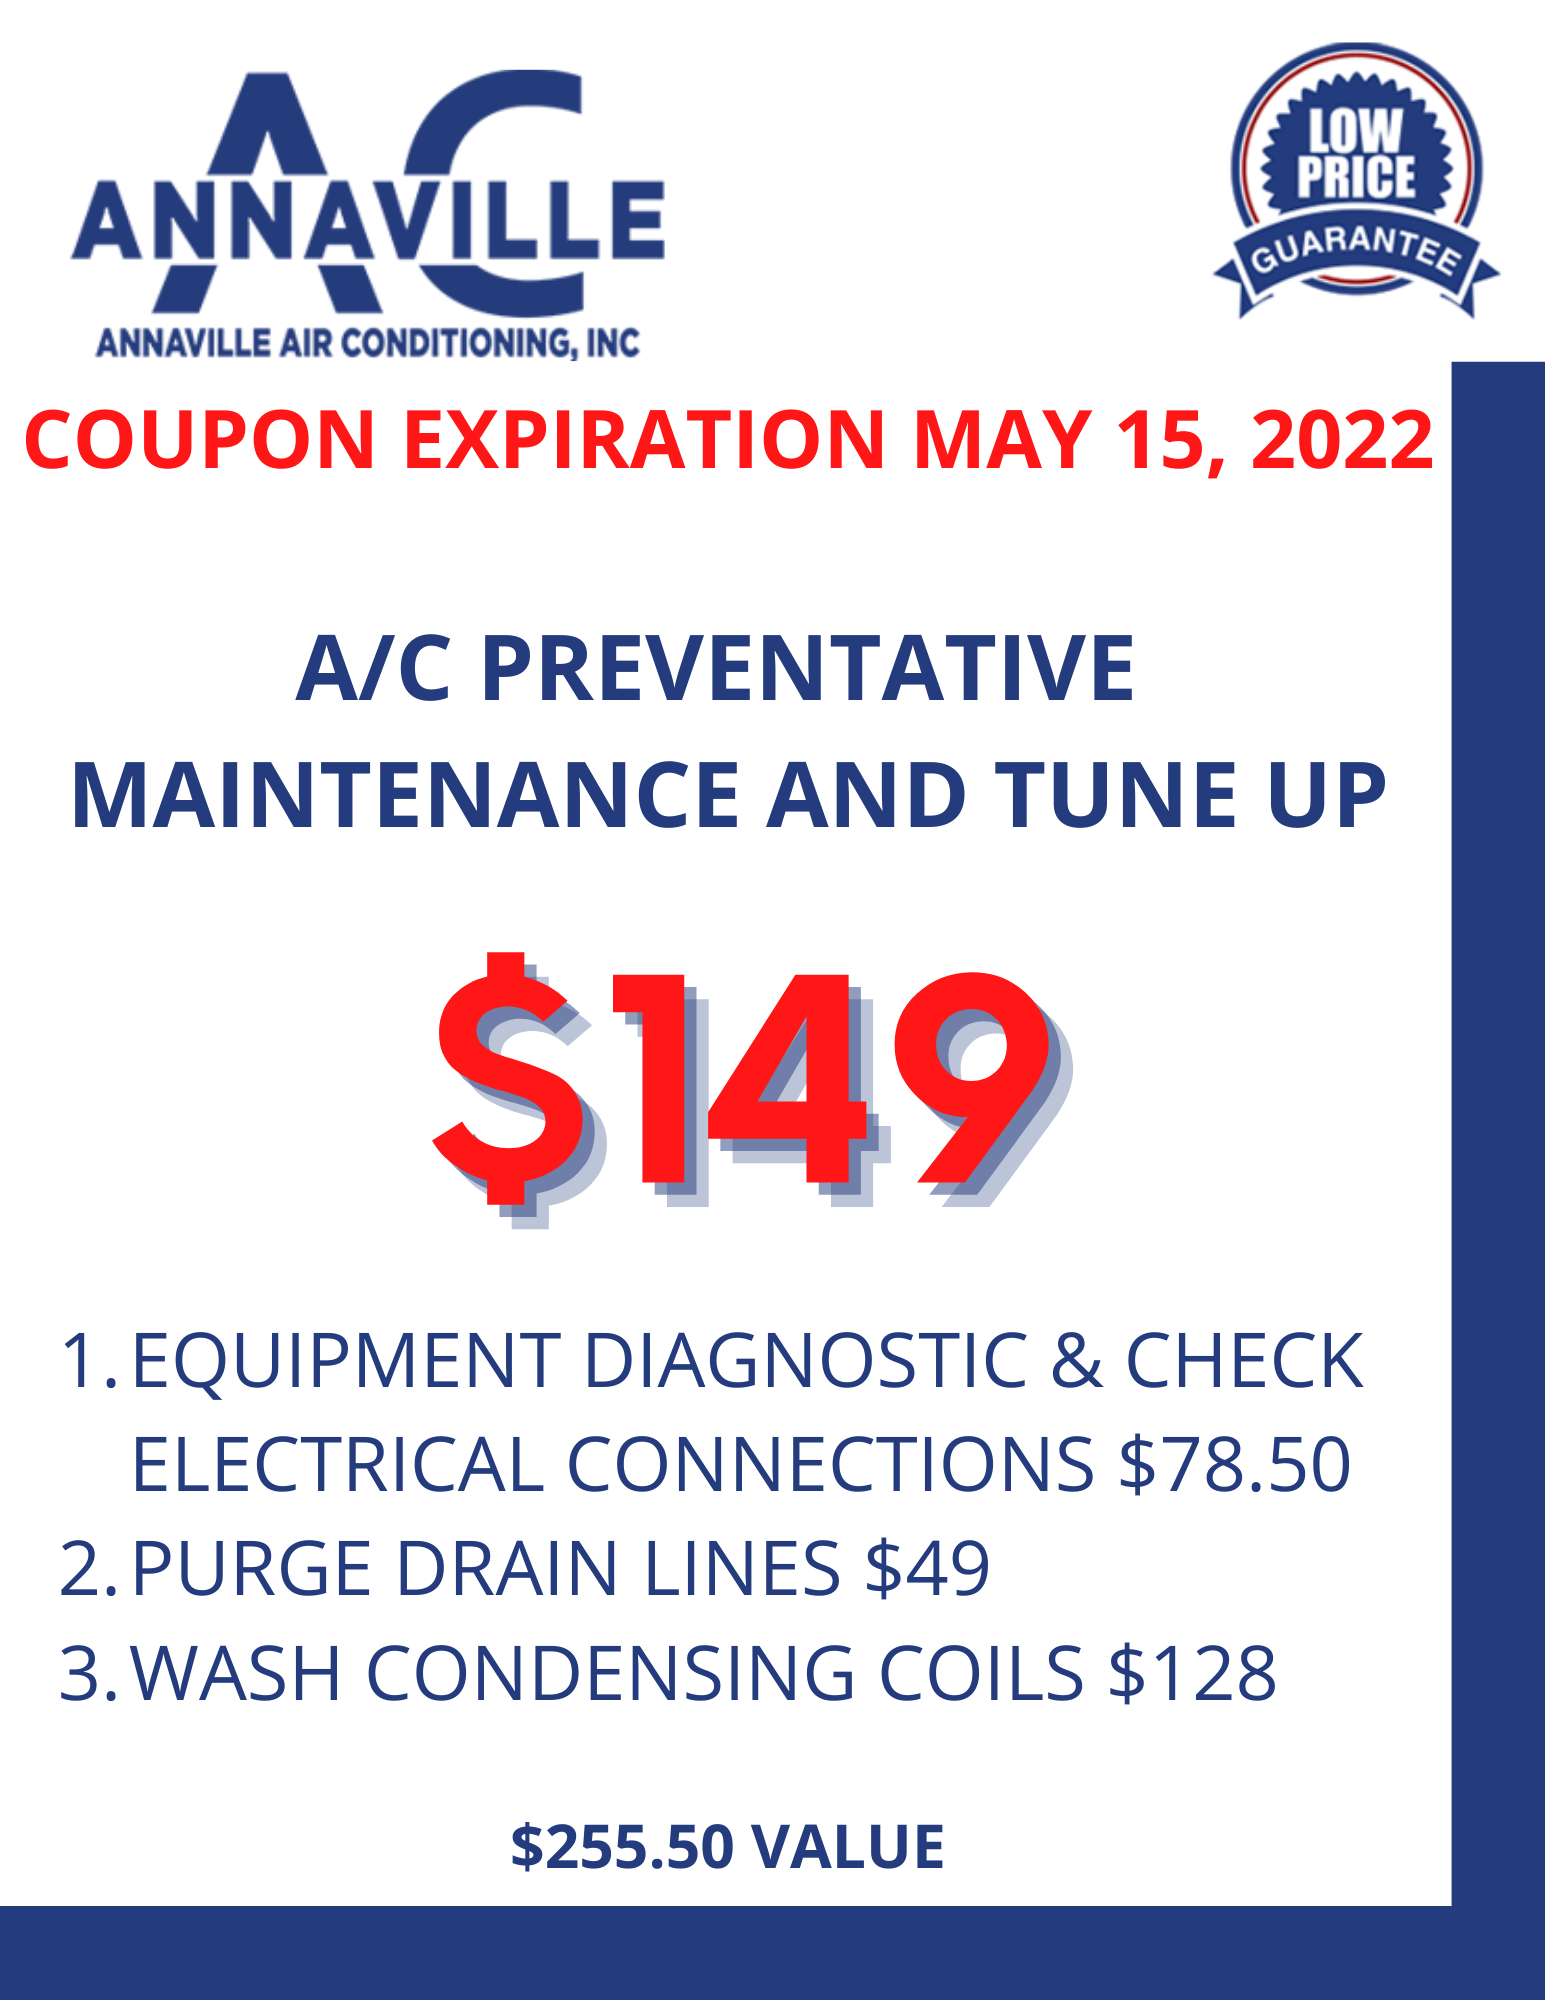 Copy of AC PREVENTATIVE MAINTENANCE AND TUNE UP